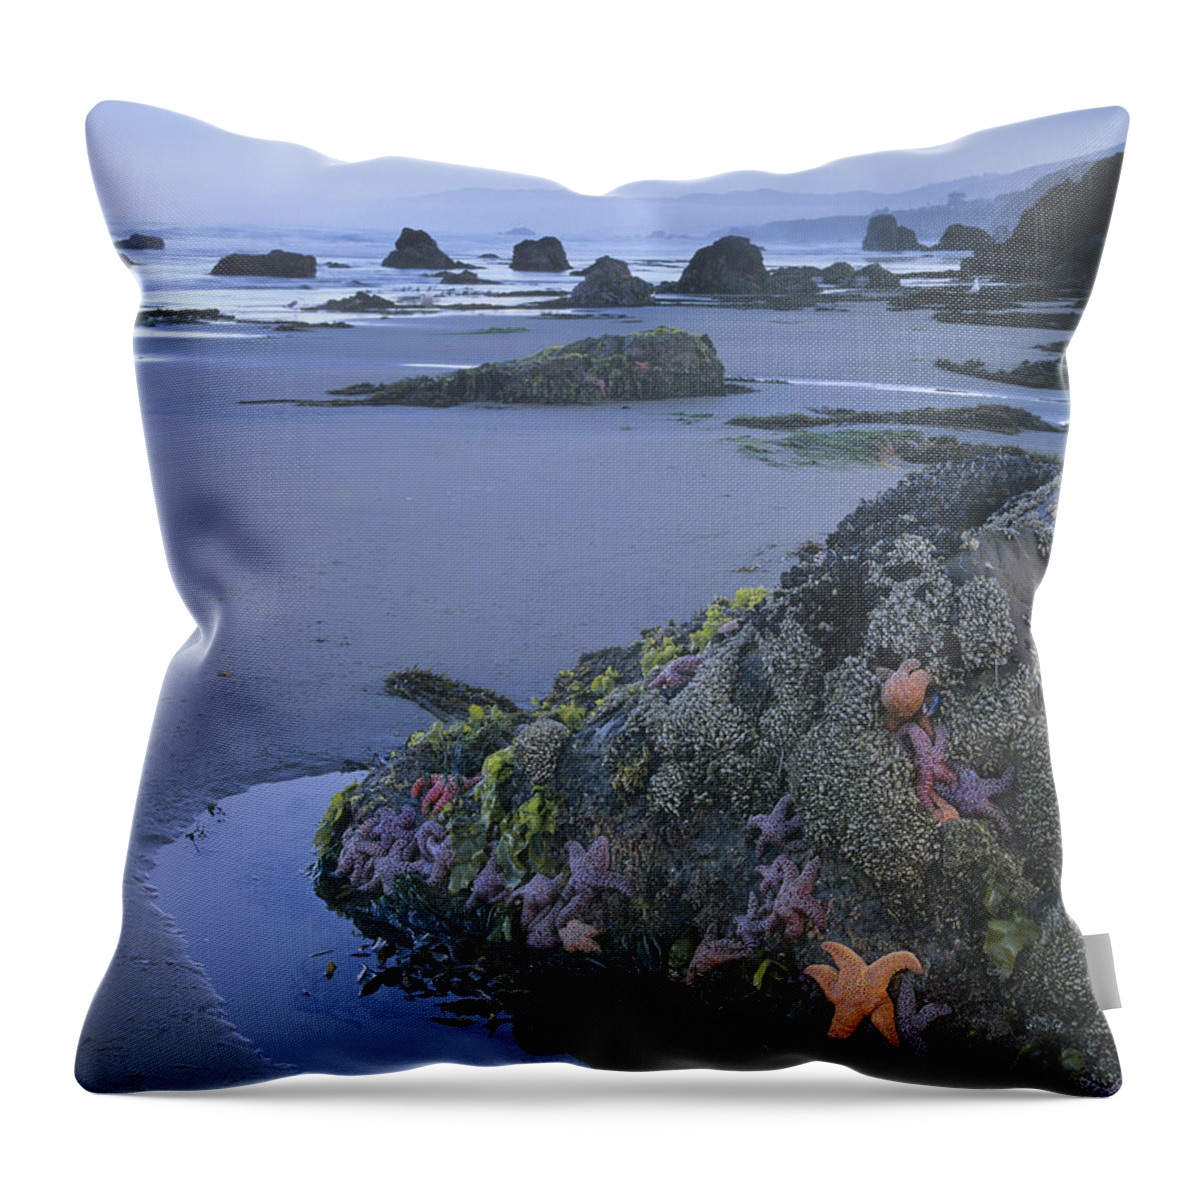 Feb0514 Throw Pillow featuring the photograph Ochre Sea Stars At Low Tide Miwok Beach by Tim Fitzharris